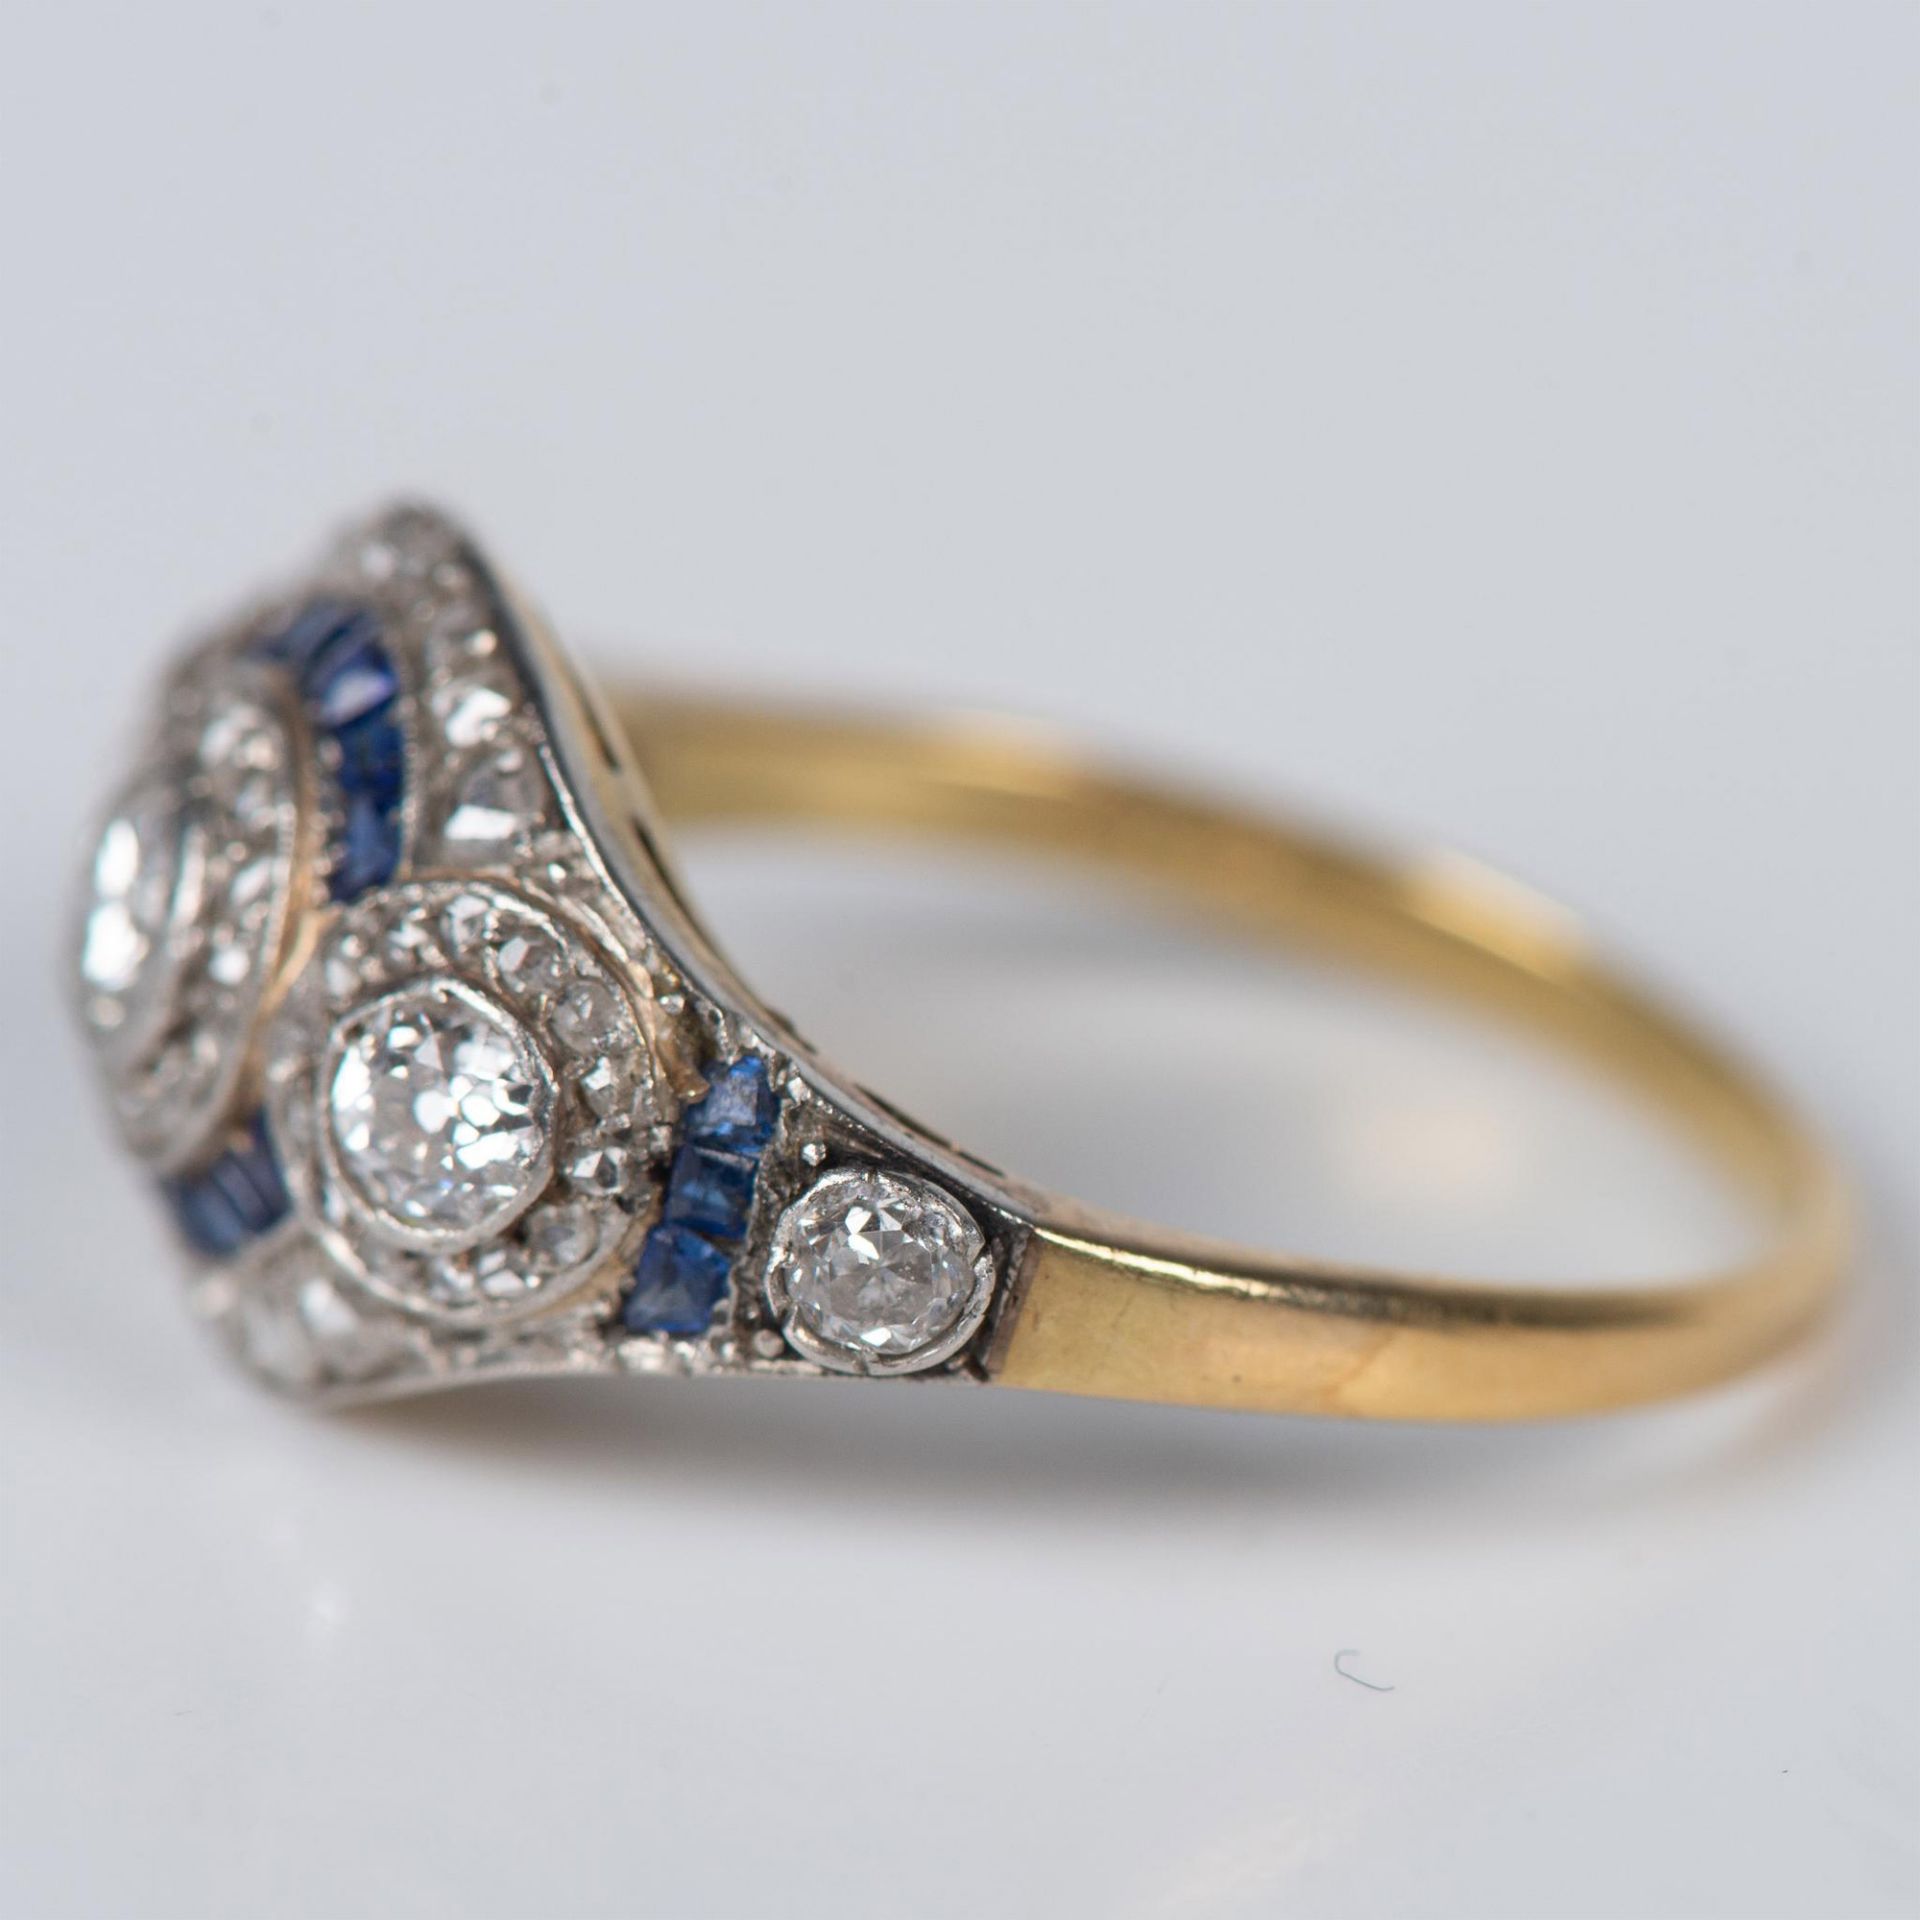 Art Deco 18K Gold, Diamonds and Sapphire Ring - Image 3 of 8